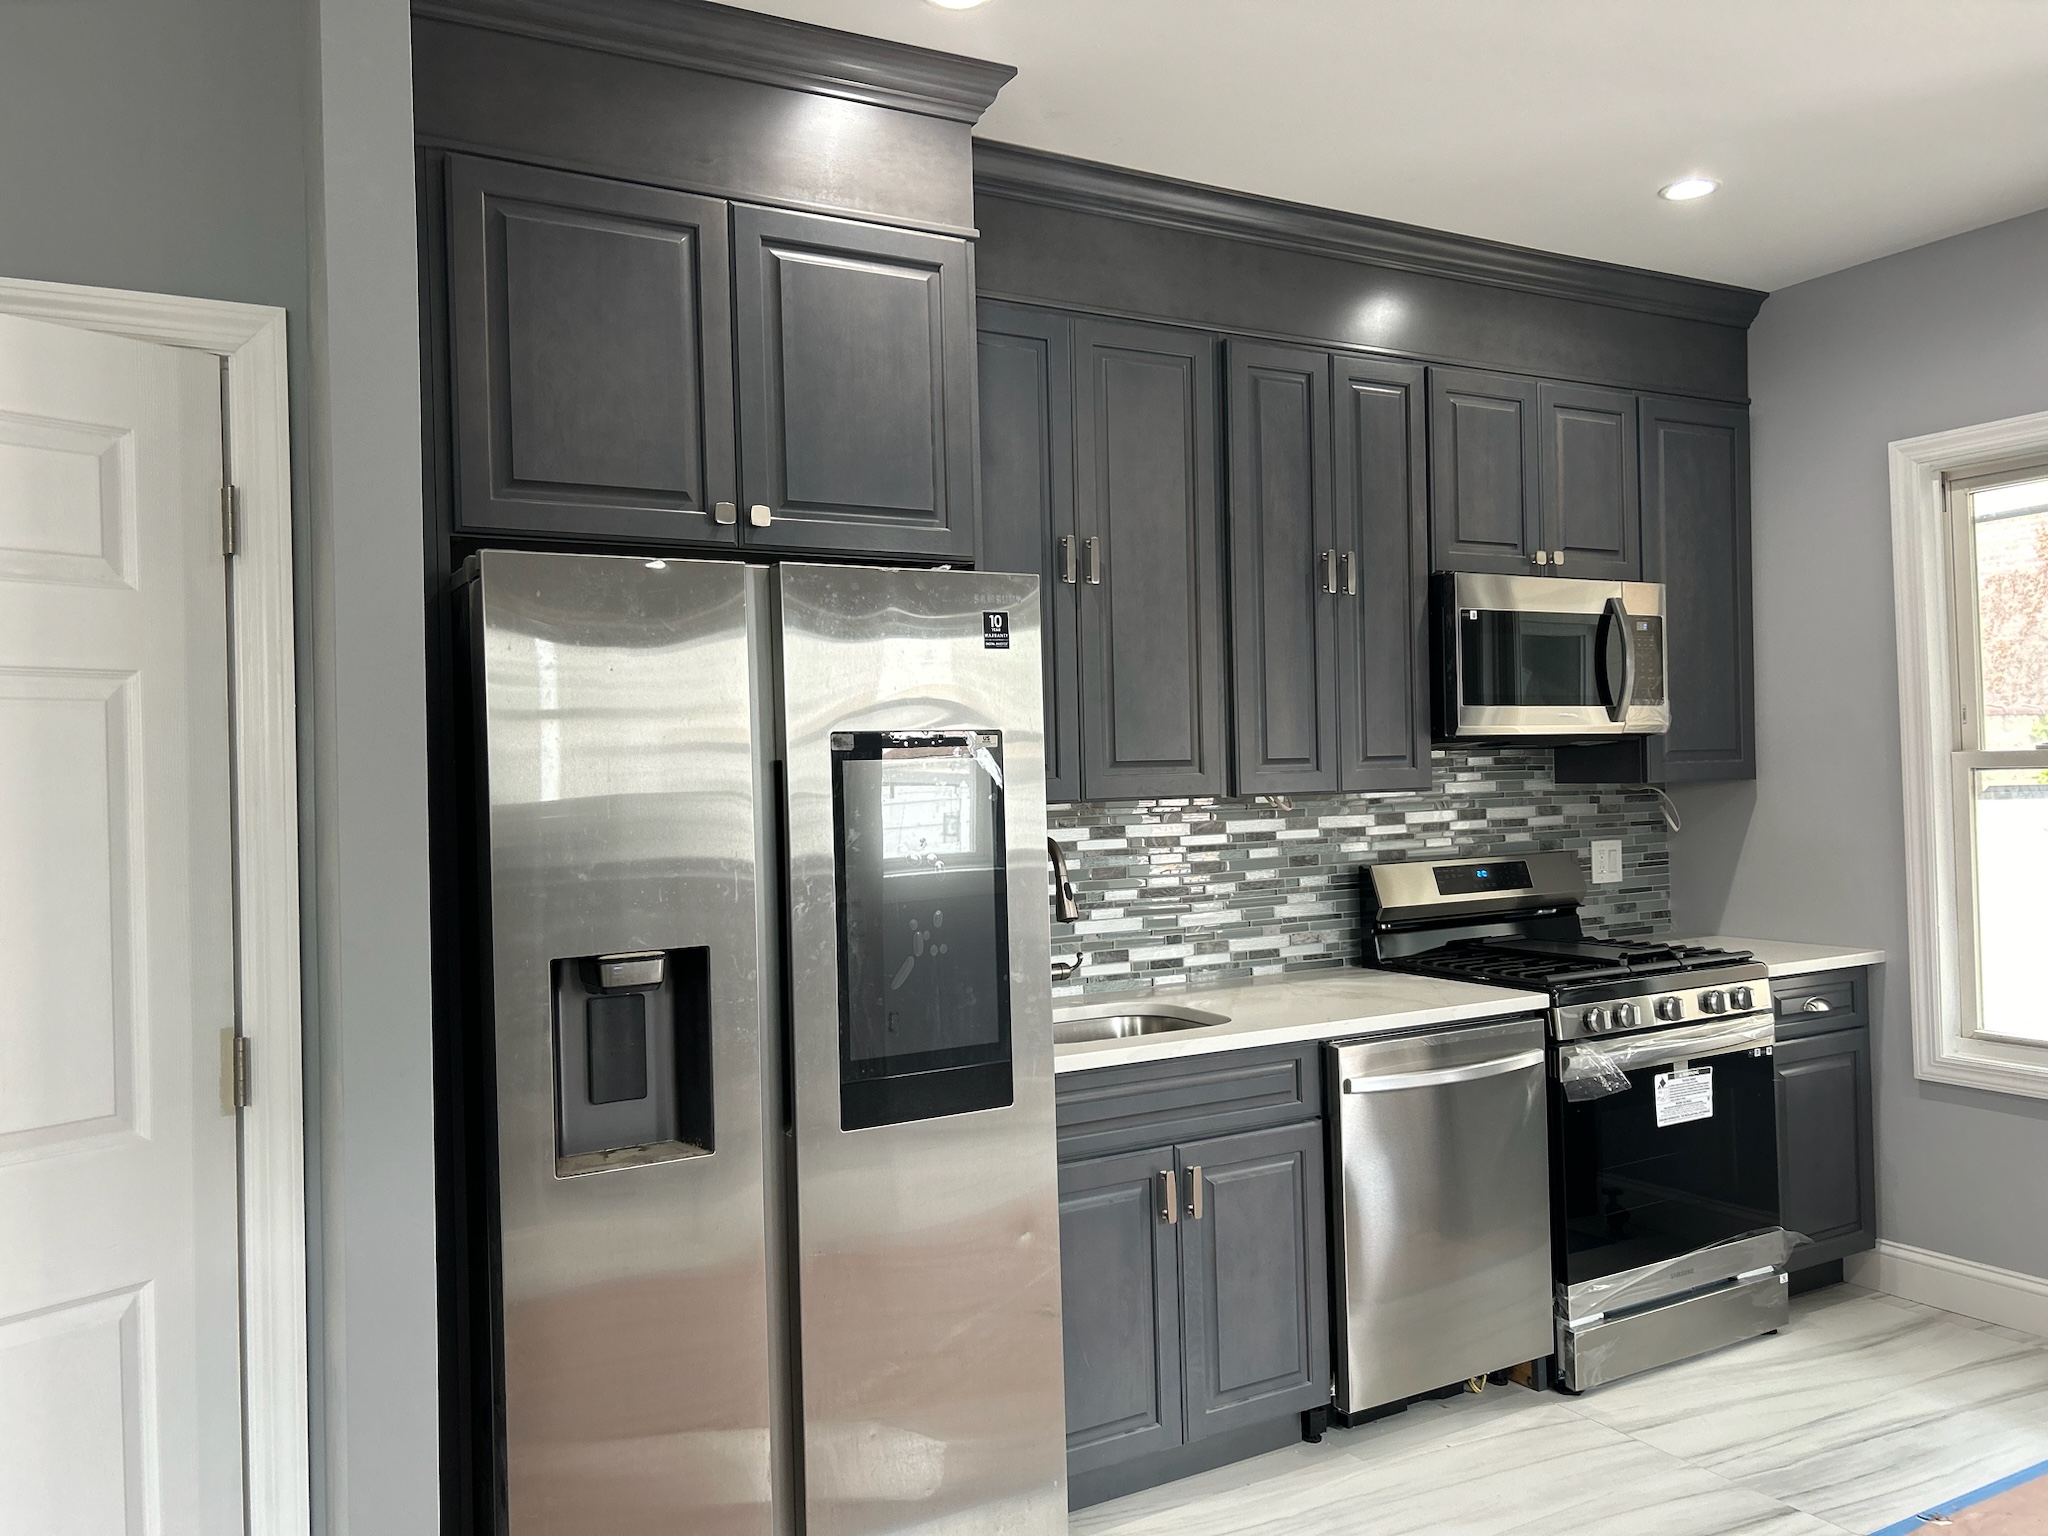 Kitchen  Remodeling in Saint Albans  Queens, NY.